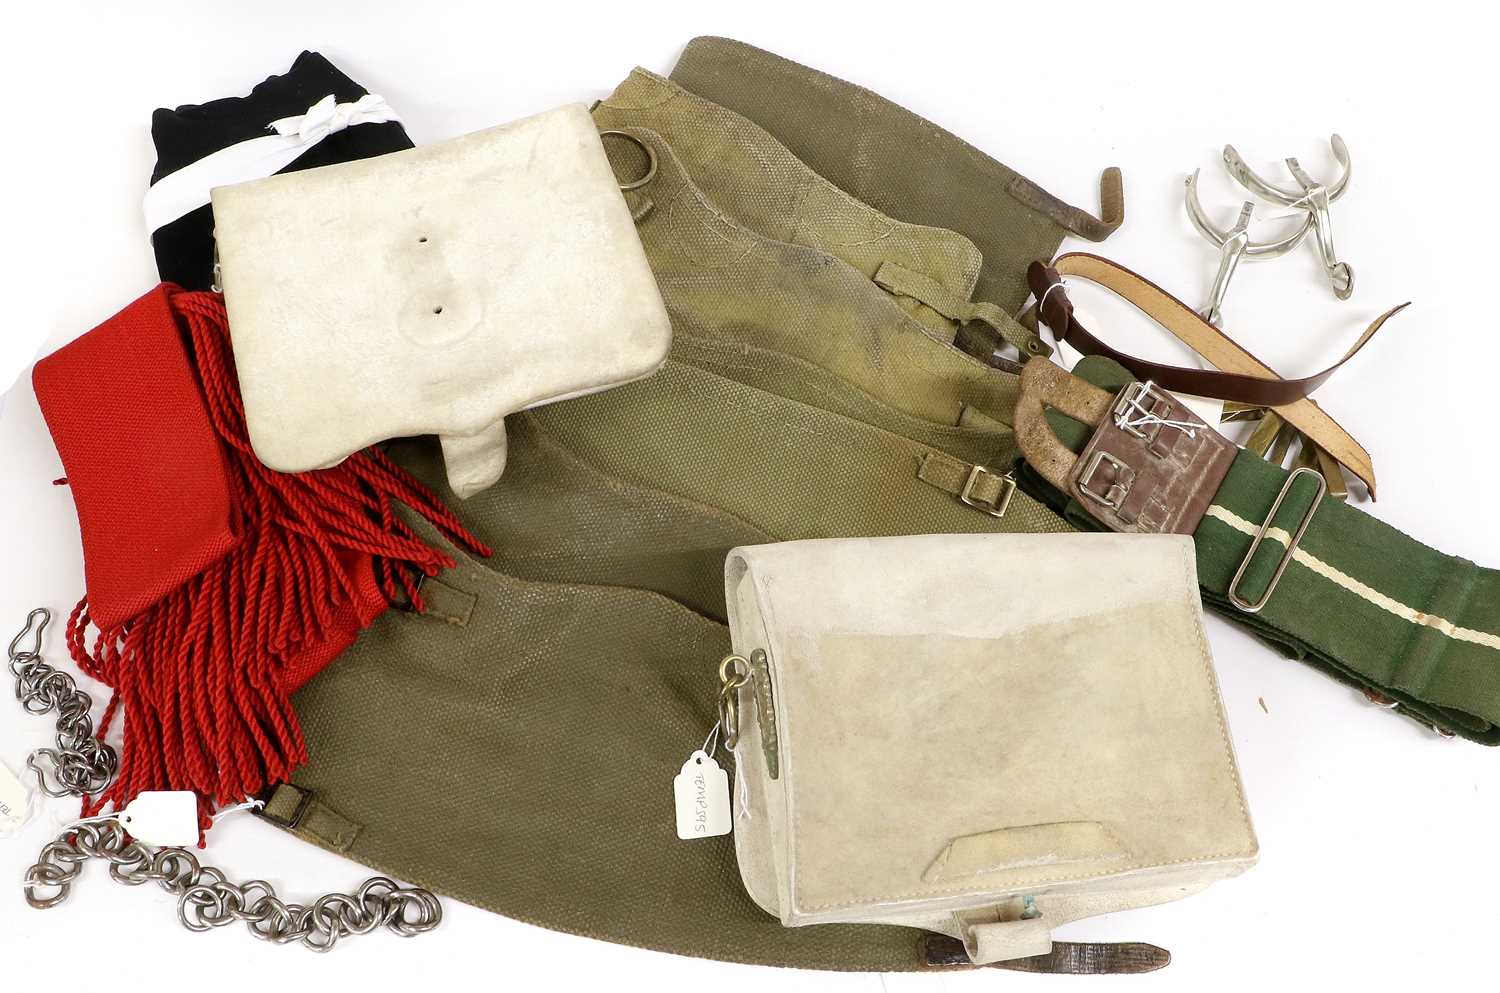 A Quantity of British Uniform Accessories, including Sam Browne belts, sword slings, leather straps, - Image 3 of 11